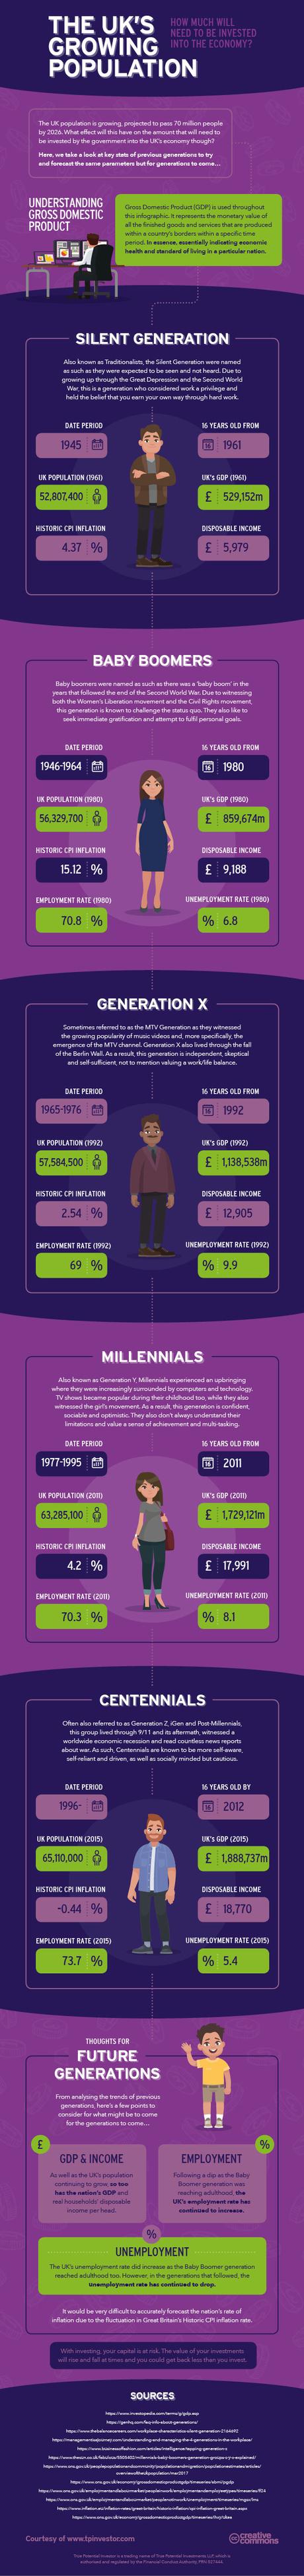 The UK's growing population - infographic